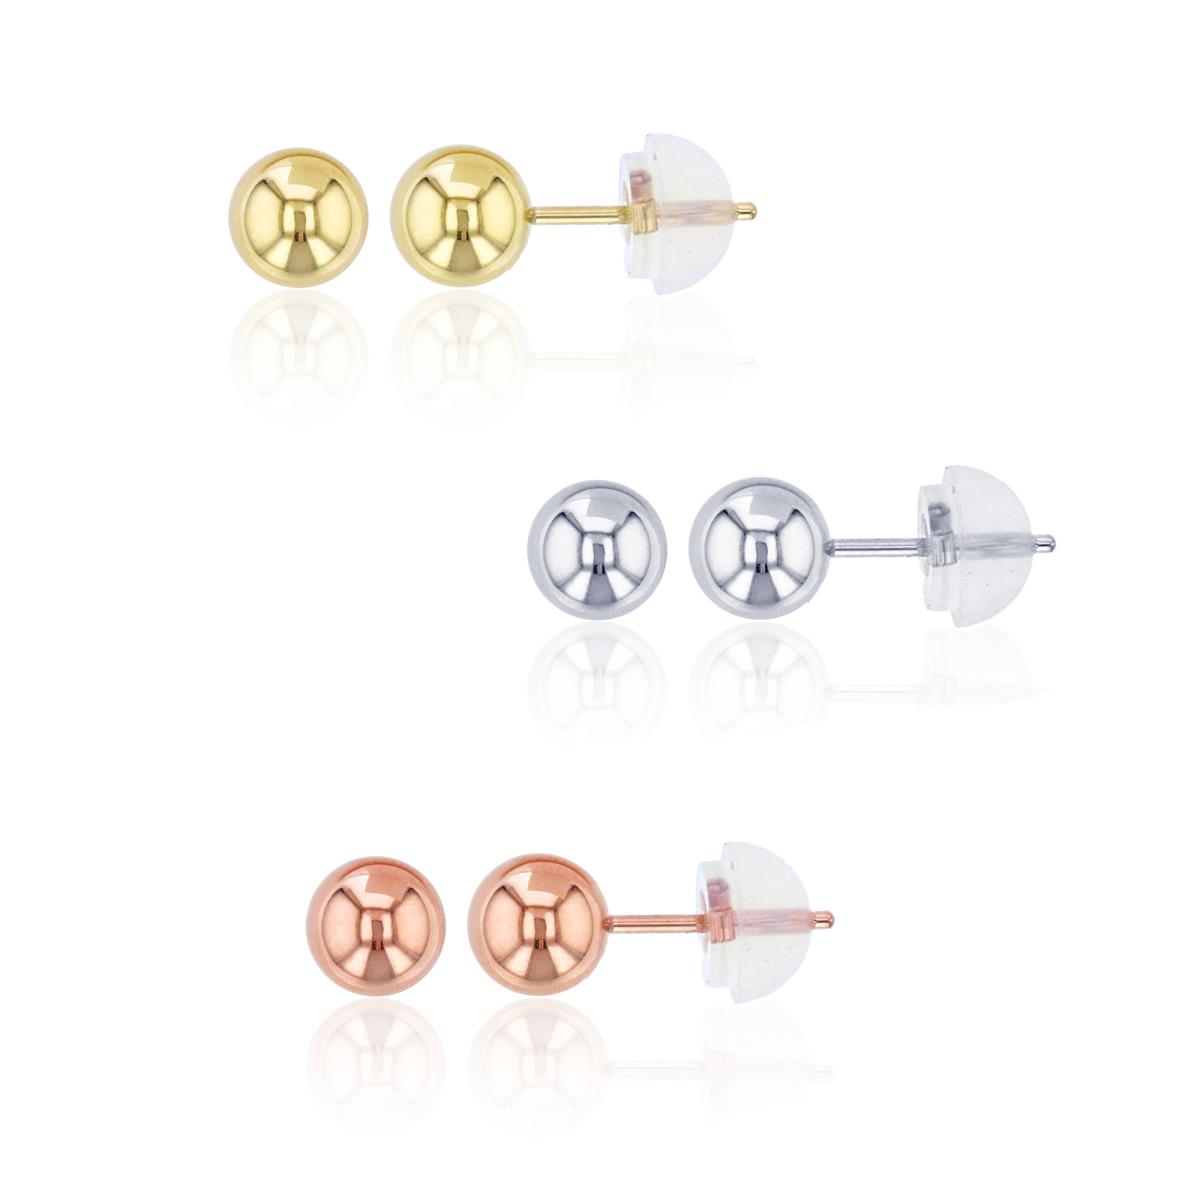 14K Gold Tricolor WYR 5MM Ball Stud Earring Set with 14K Silicone Backs 